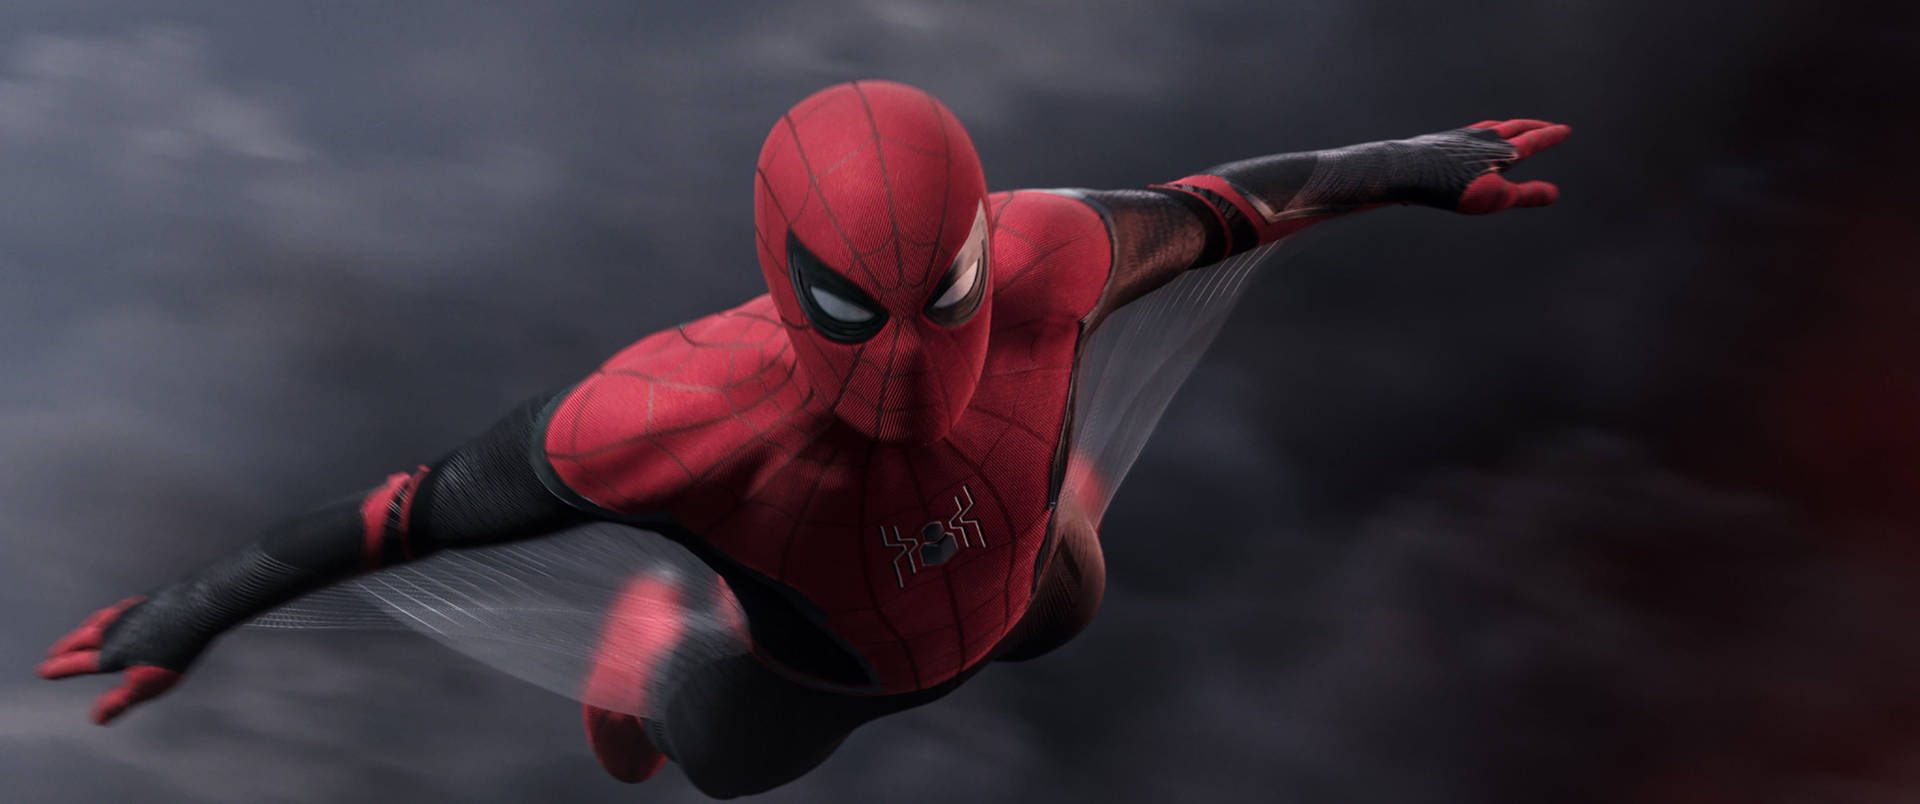 Gliding Spider Man Far From Home 2019 Wallpaper